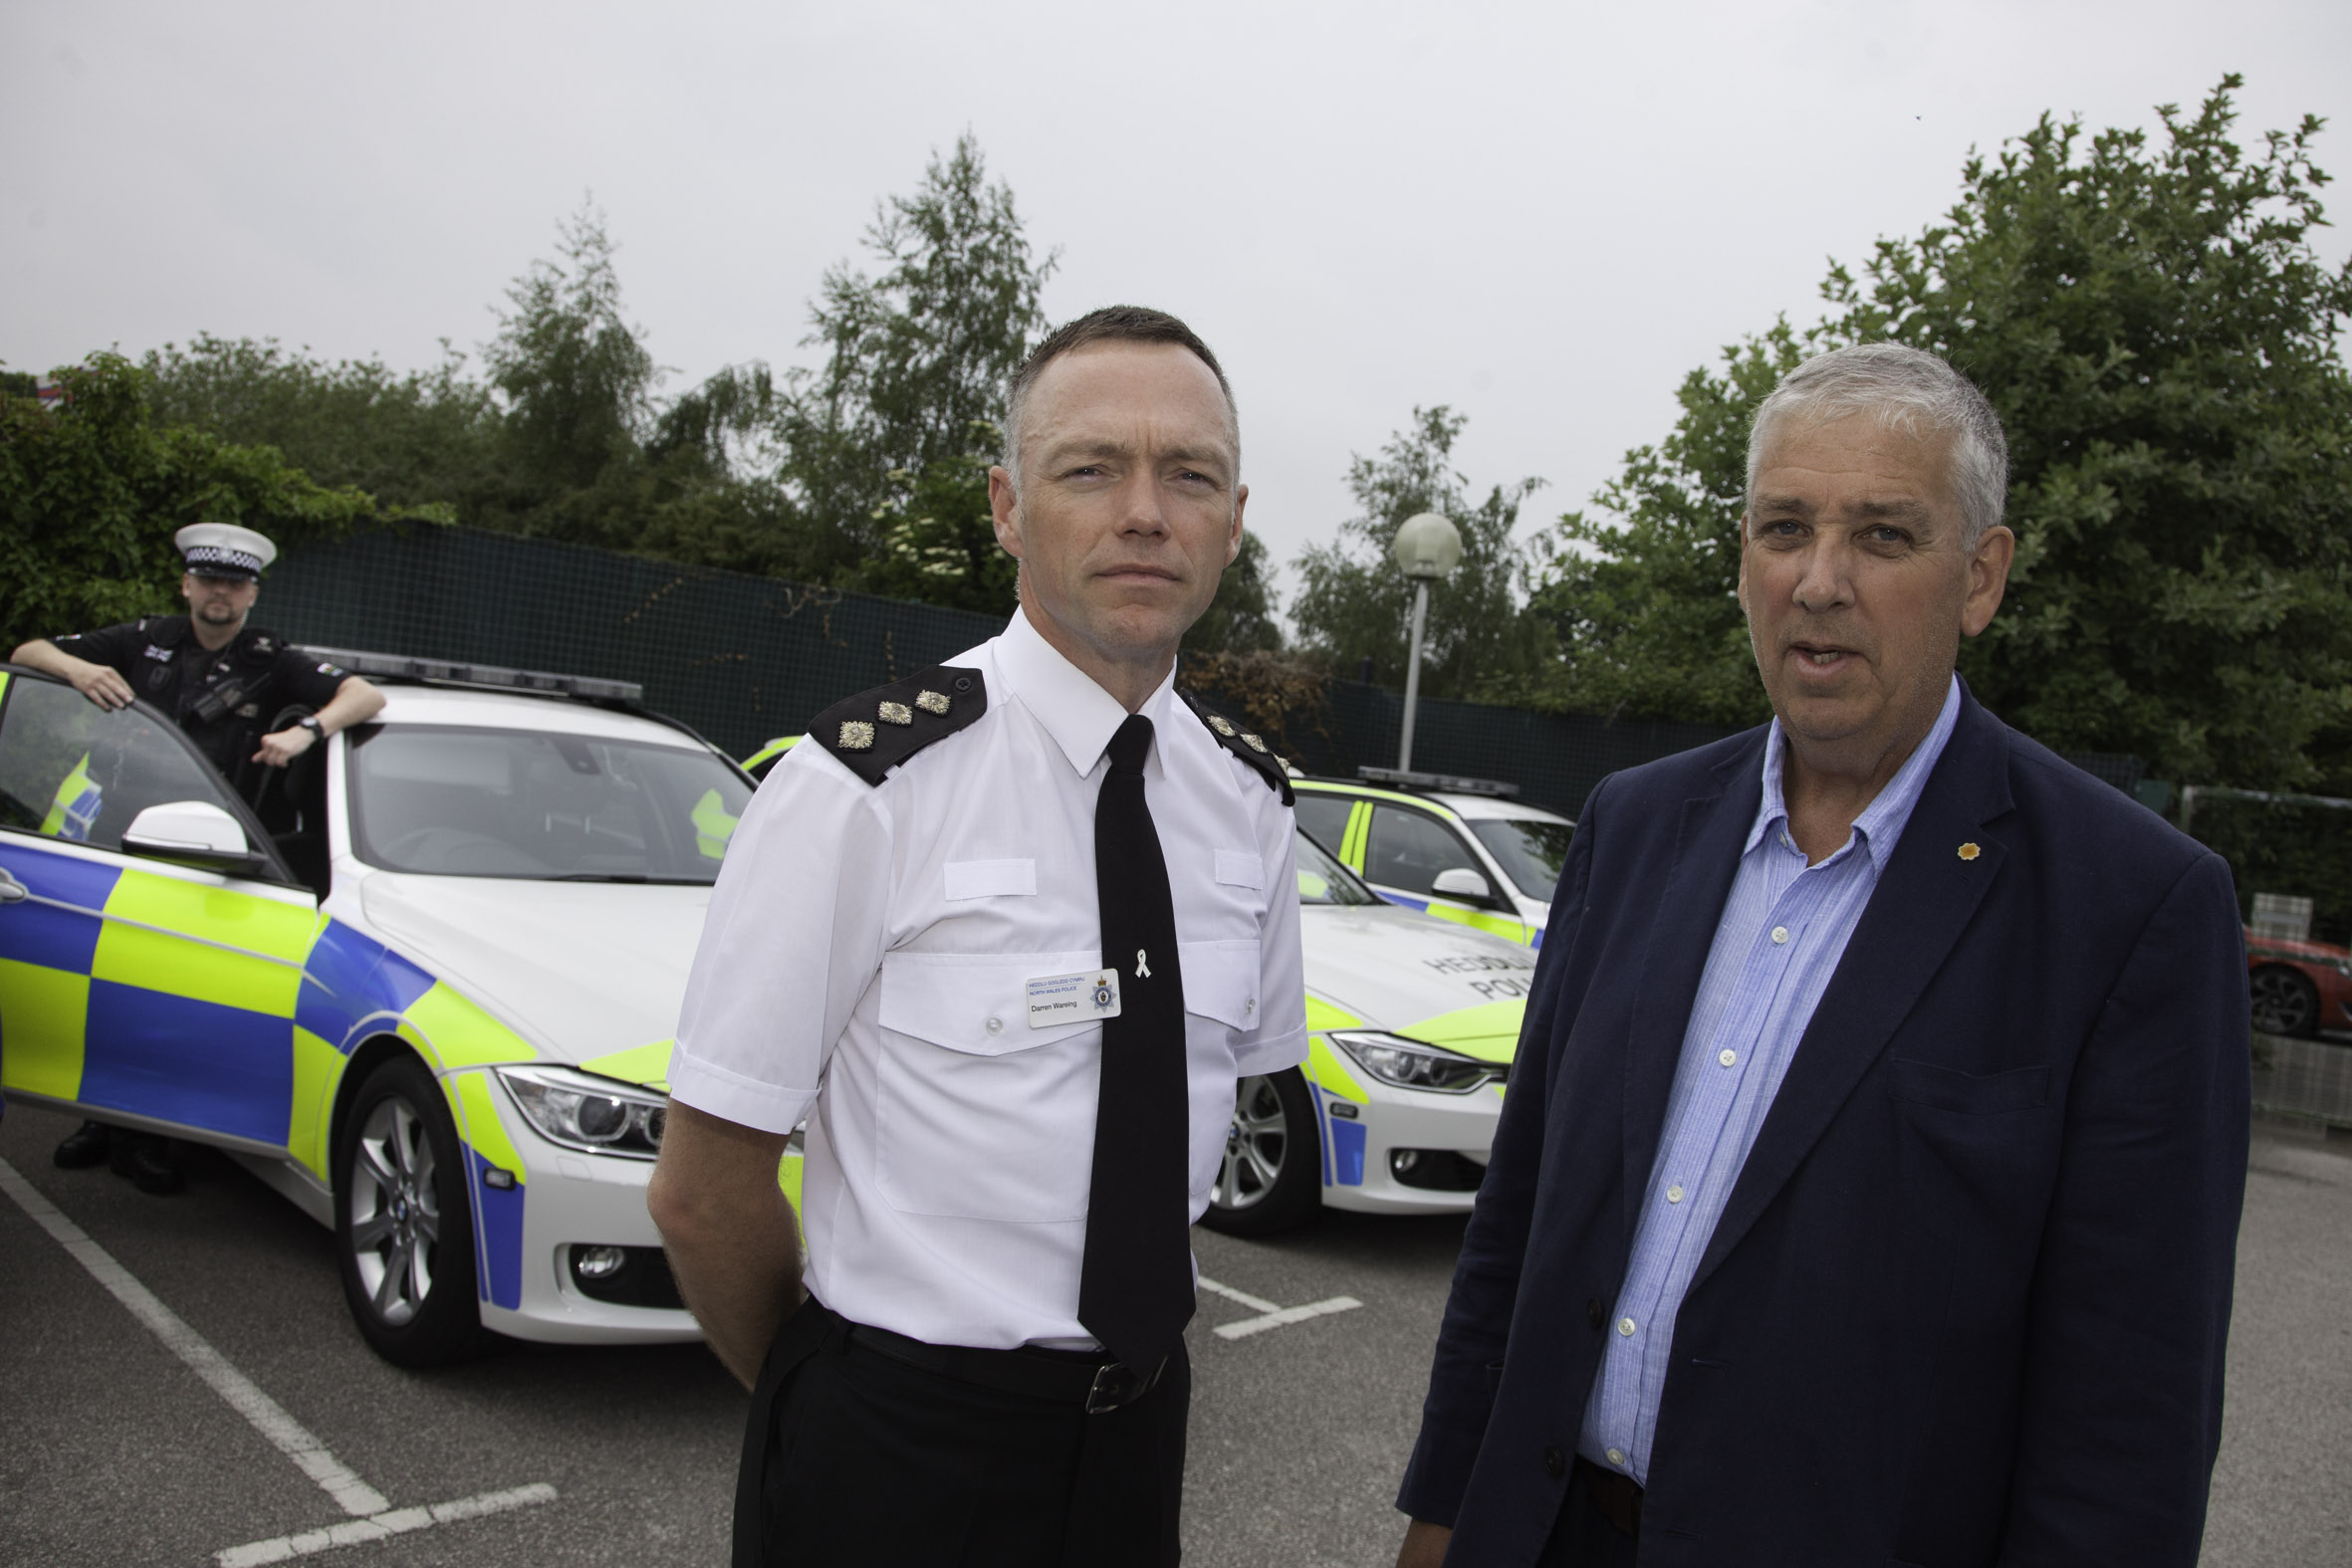 Police boss wants more dashcams to boost road safety in North Wales